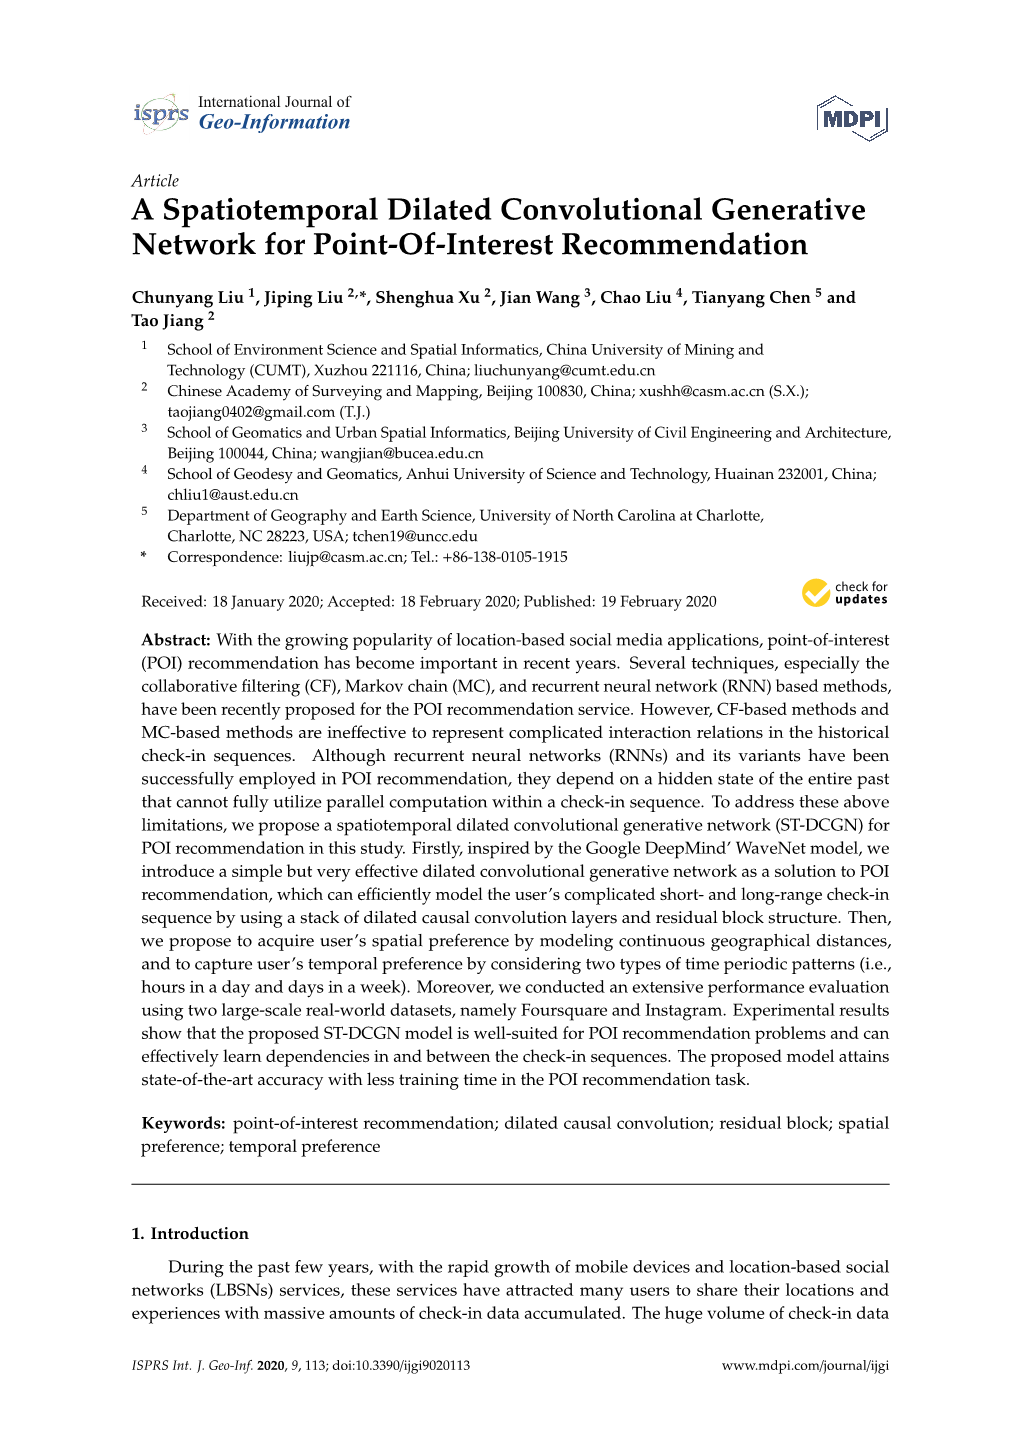 A Spatiotemporal Dilated Convolutional Generative Network for Point-Of-Interest Recommendation